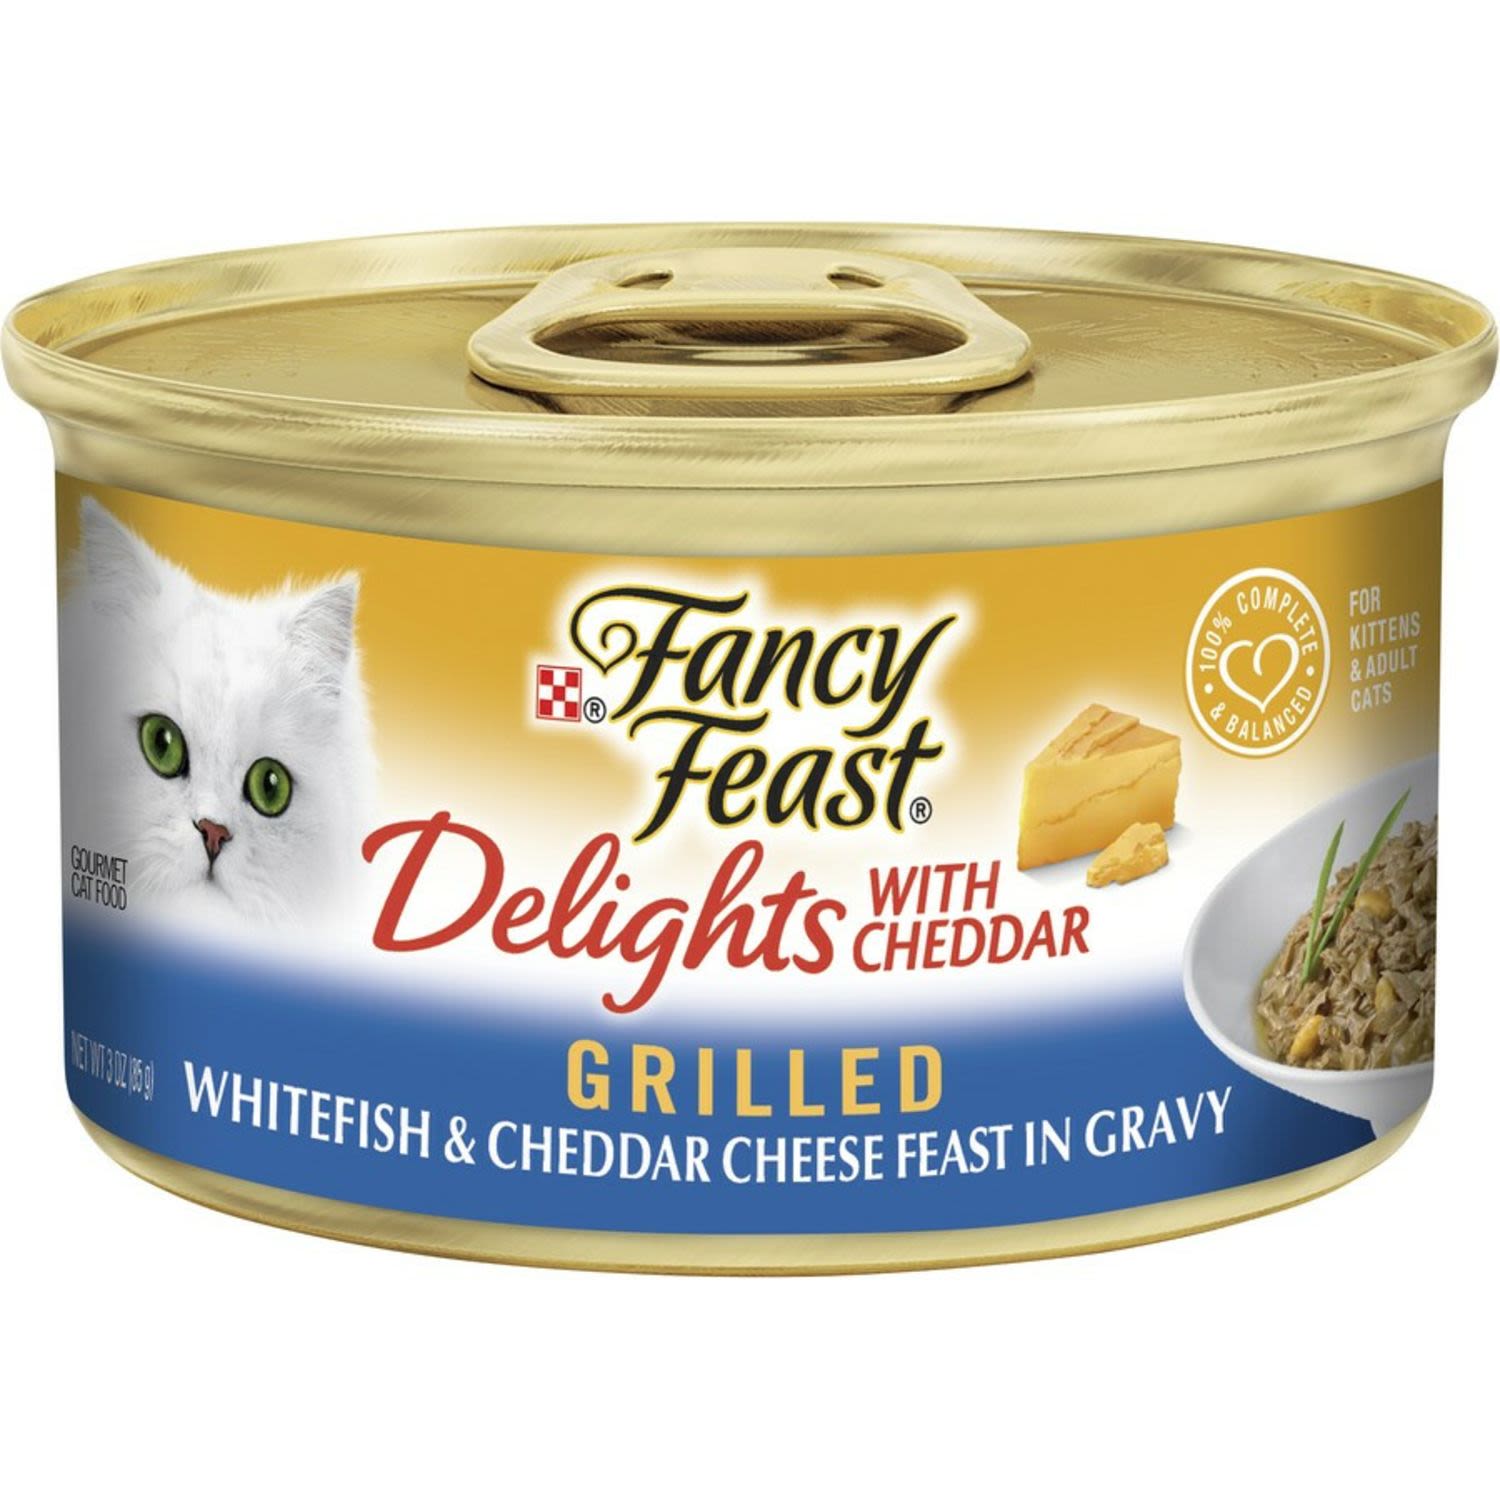 Fancy Feast Adult Delights With Cheddar Whitefish & Cheddar Cheese Feast In Gravy Grilled Wet Cat Food, 85 Gram